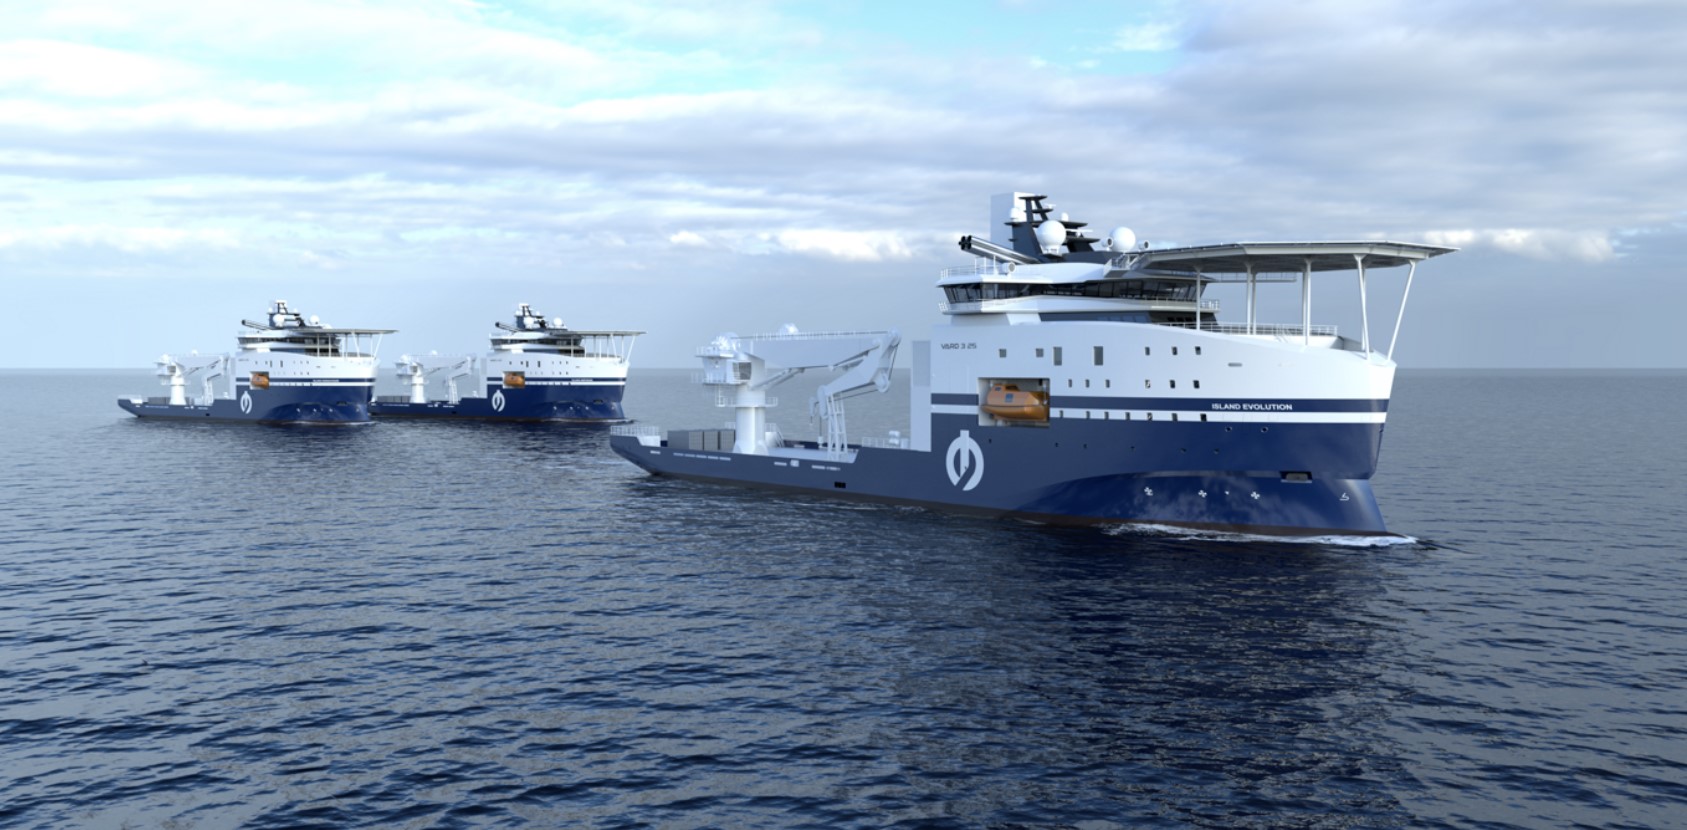 Island Offshore orders hybrid ocean energy construction vessel at VARD with option for two more